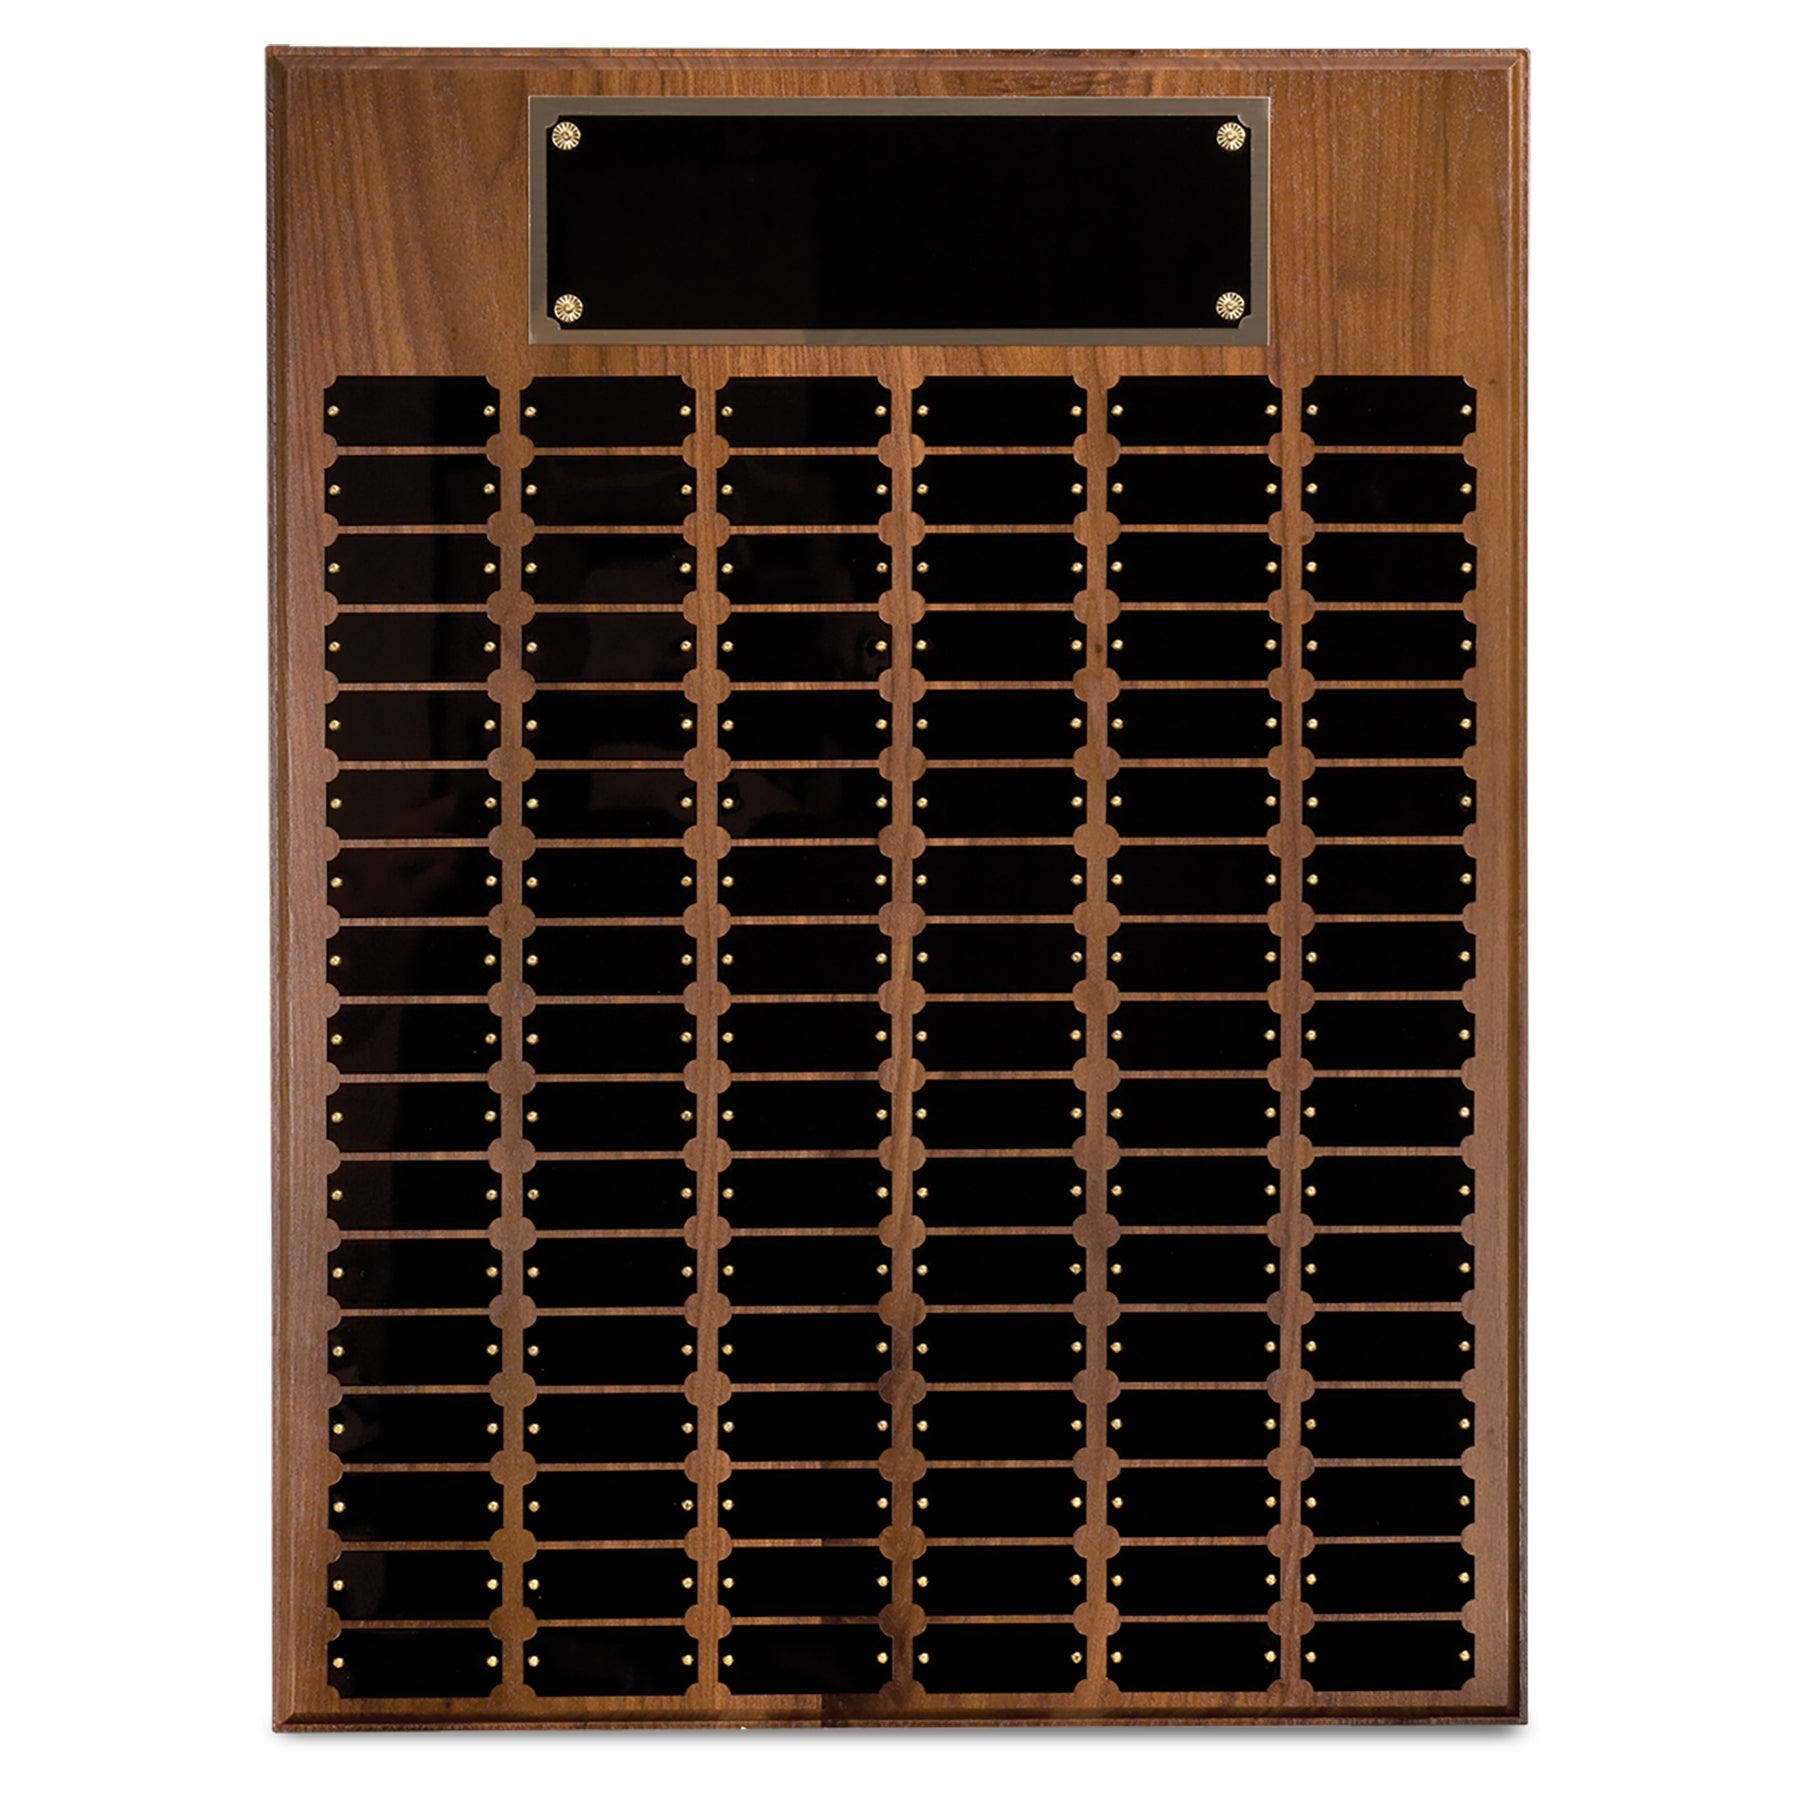 Walnut Completed Perpetual Plaque, 102 Plate, Laser Engraved Perpetual Plaque Craftworks NW 